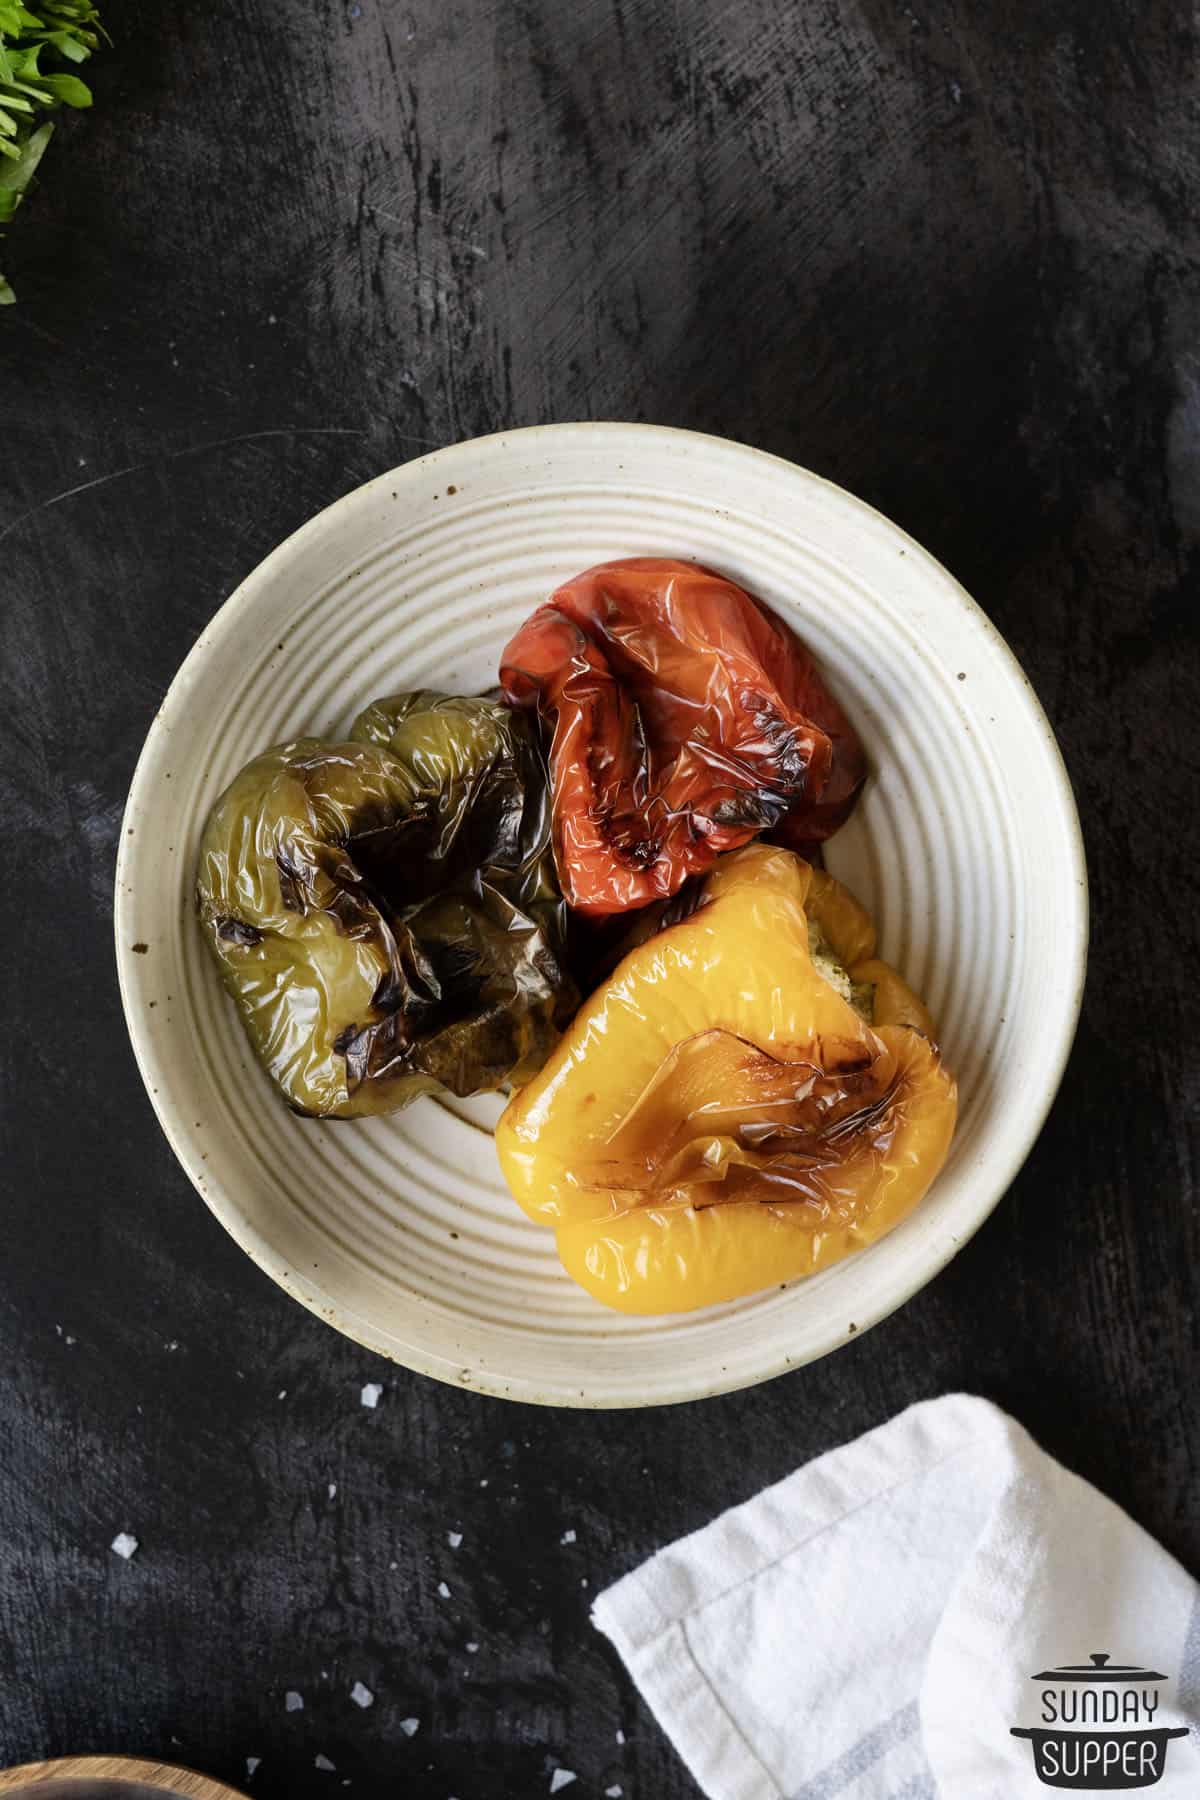 three types of roast pepper on a plate